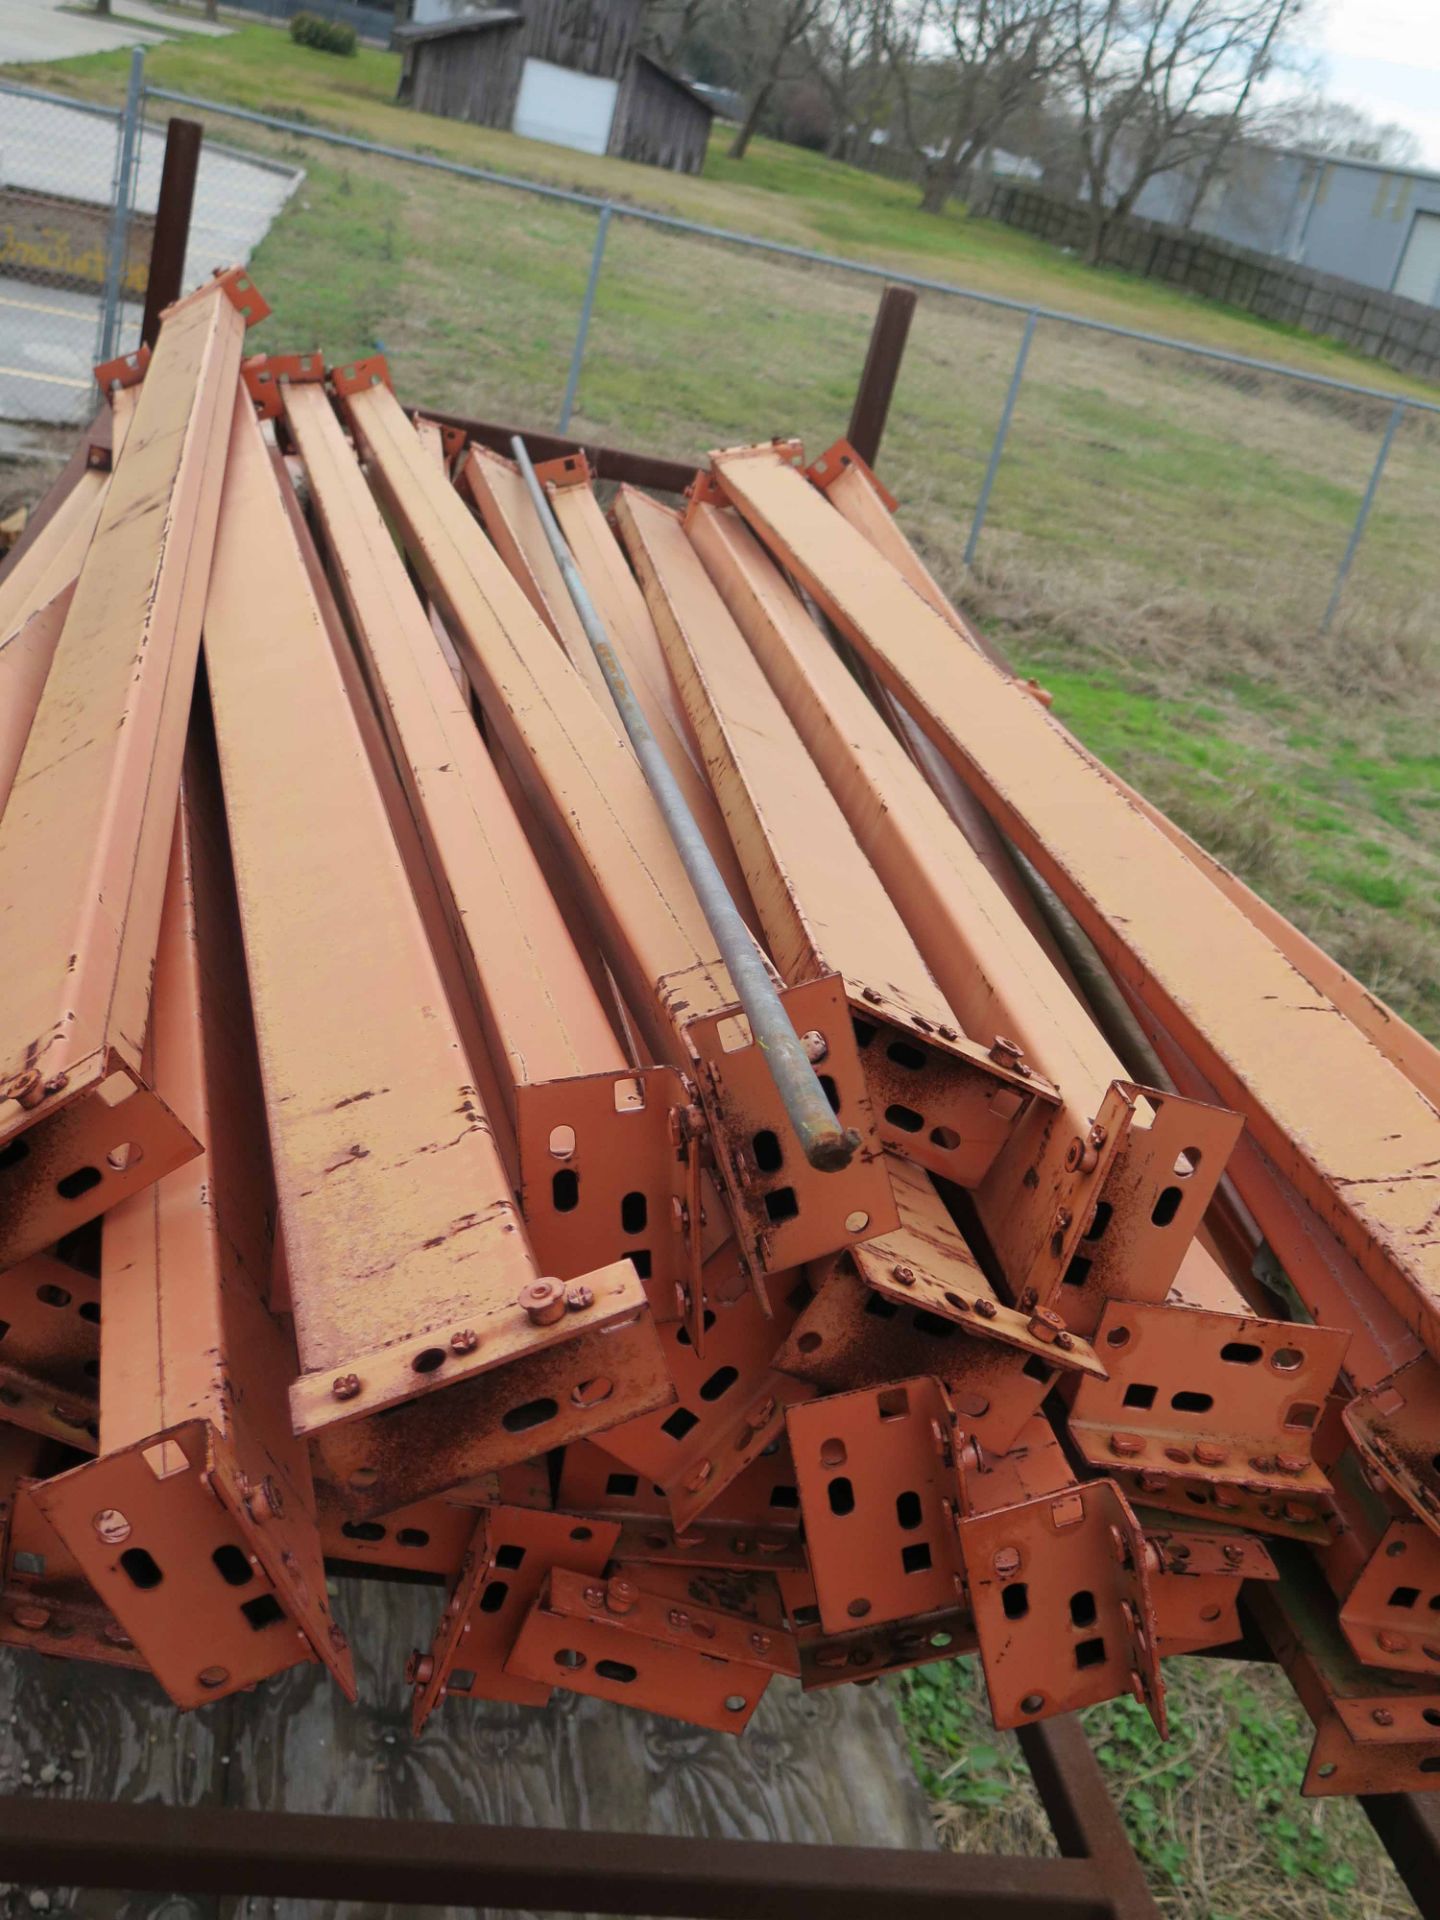 LOT CONSISTING OF: pallet rack uprights & cross arms (add'l. cross arms are located on top of Lot - Image 4 of 5